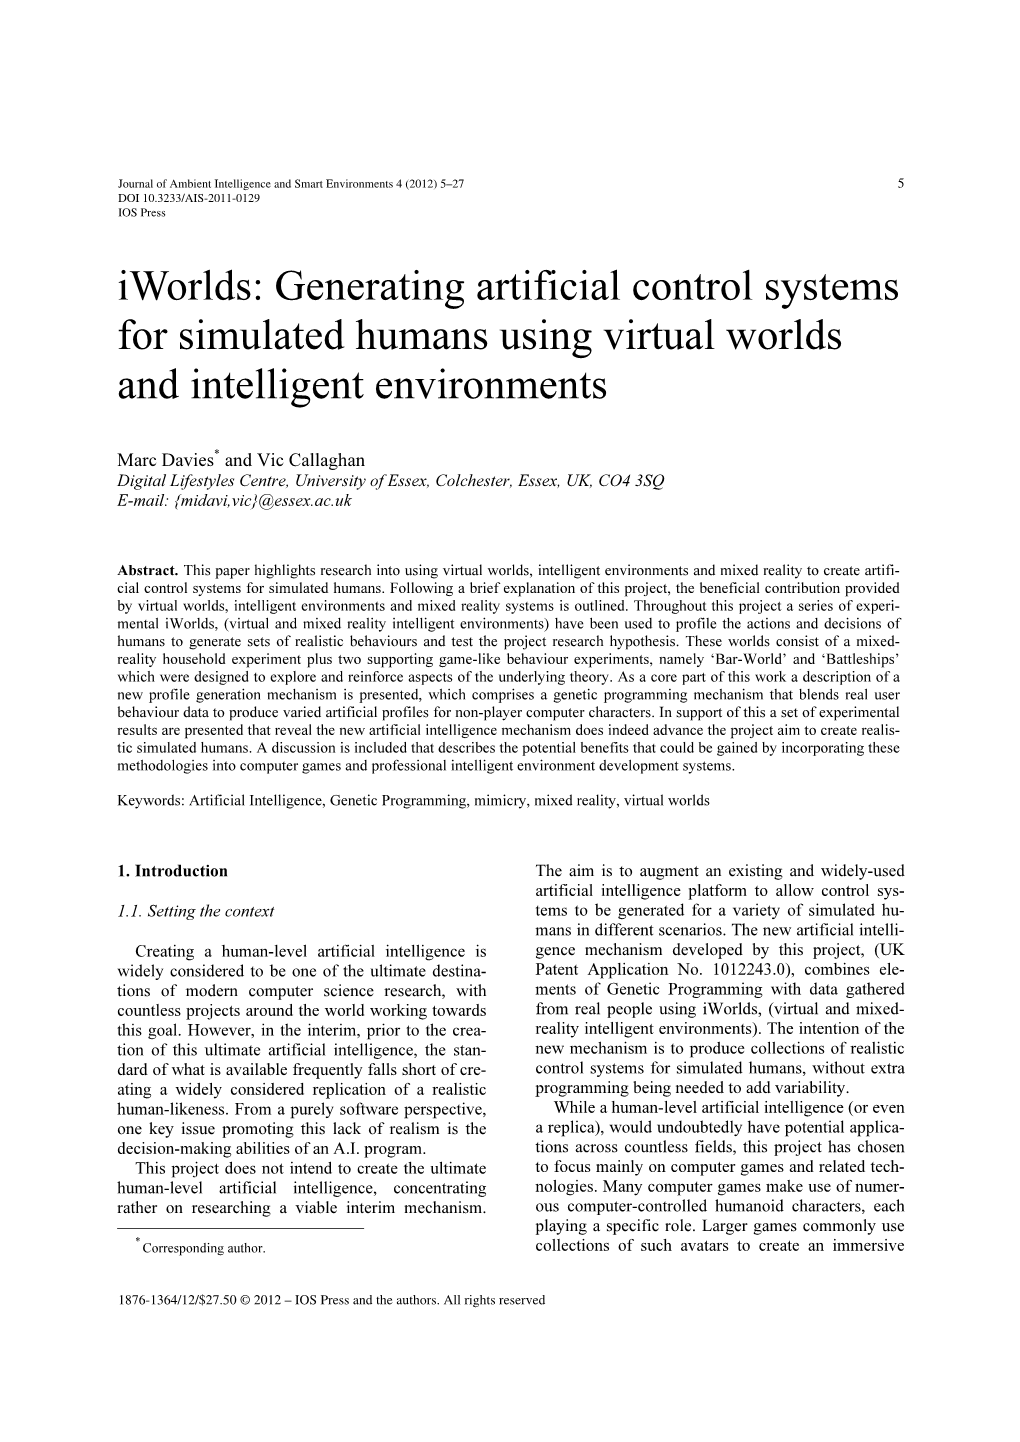 Iworlds: Generating Artificial Control Systems for Simulated Humans Using Virtual Worlds and Intelligent Environments